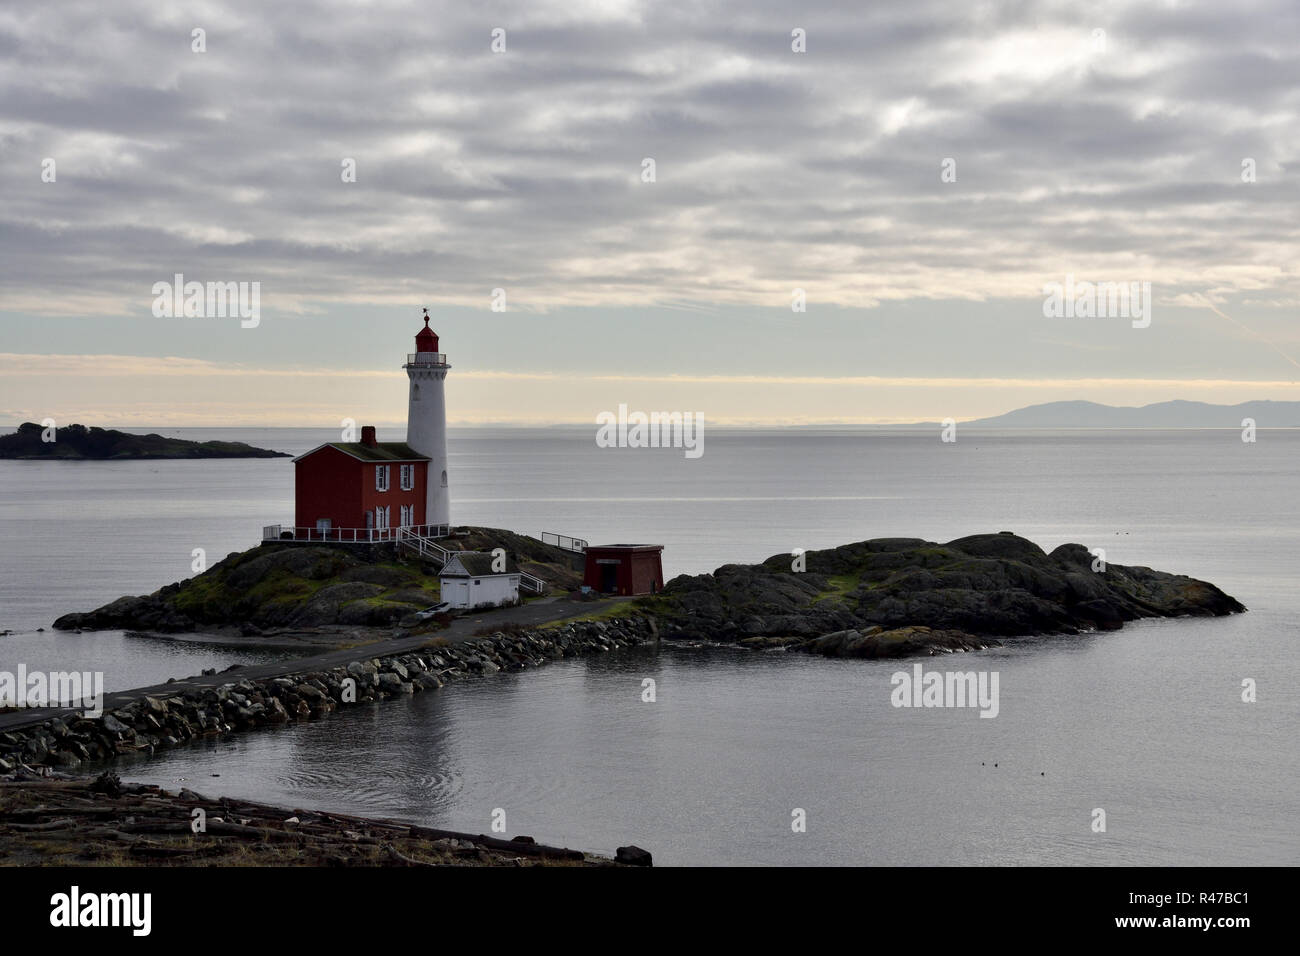 Historic Fisgard lighthouse at the entrance to Esquimalt Harbour and Royal Roads. Stock Photo